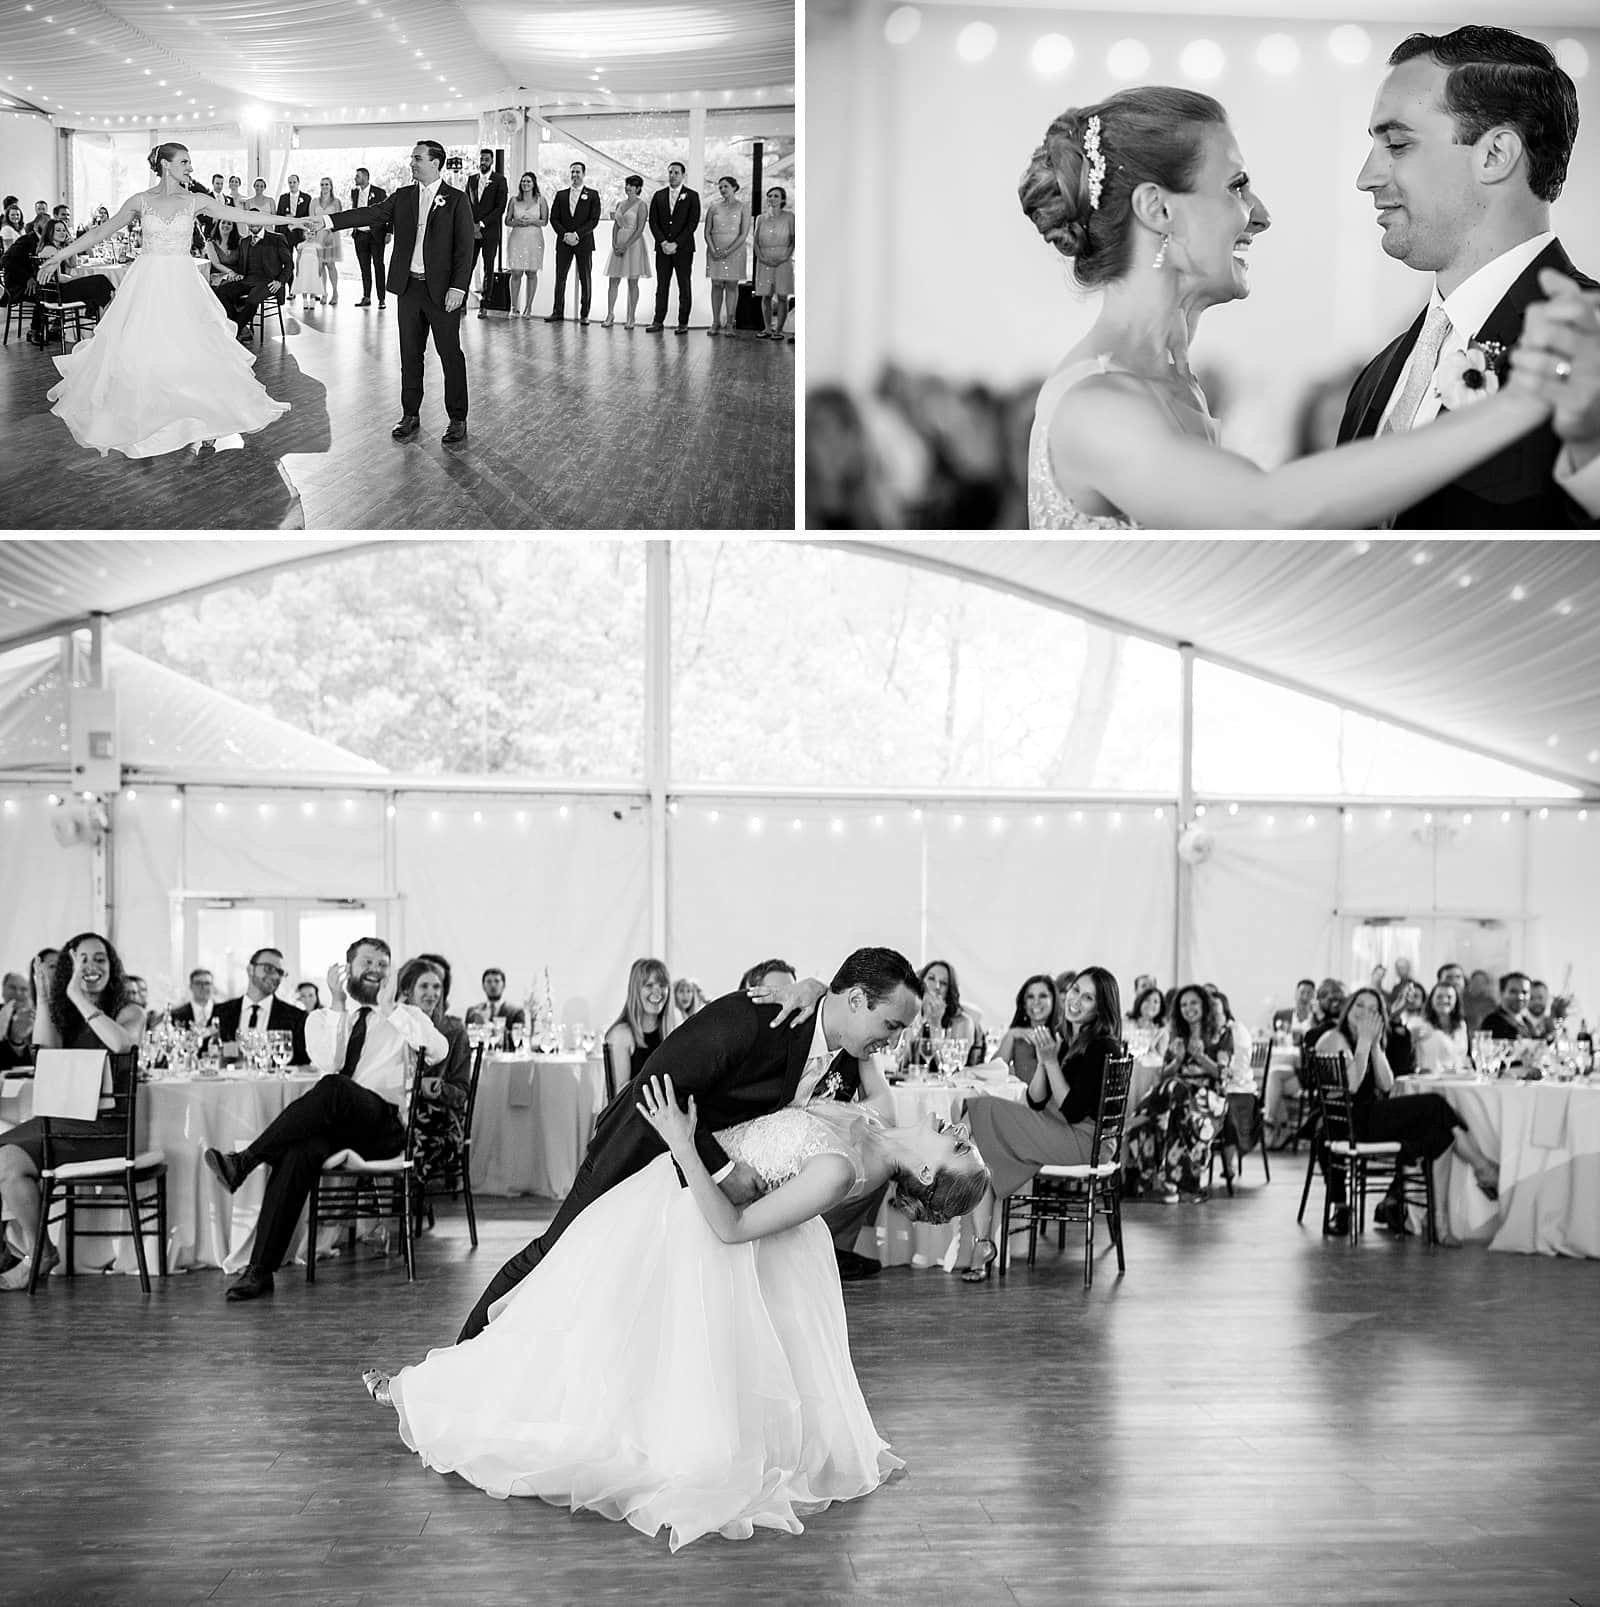 Black and white wedding shots, bride and grooms first dance, groom dipping bride, Glen Foerd Mansion wedding